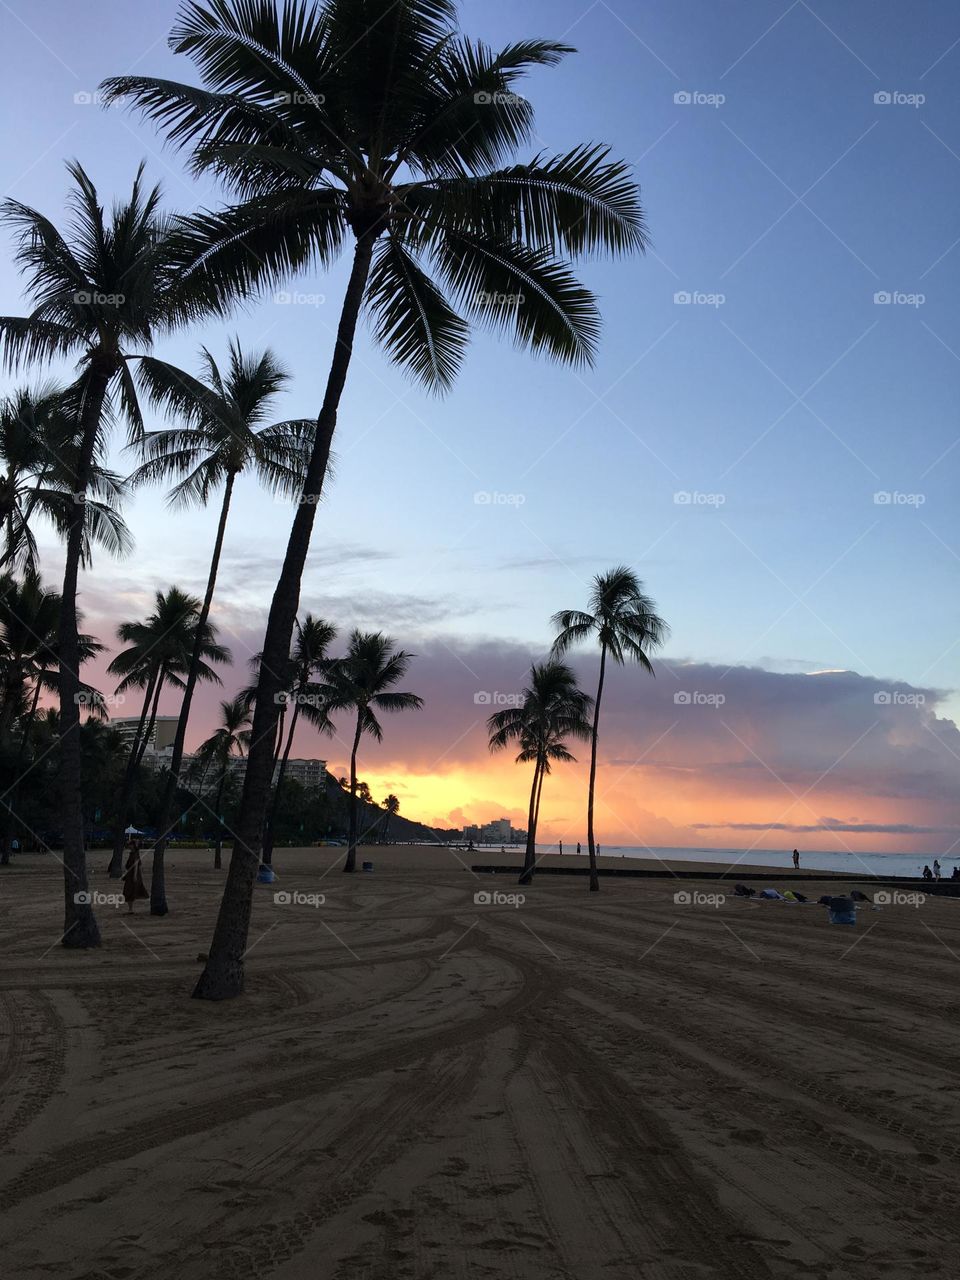 The orange sun setting on a beautiful Hawaii island day.  Palm trees sway on the beach as people practice yoga in the sand by the ocean for a calm, serene experience 